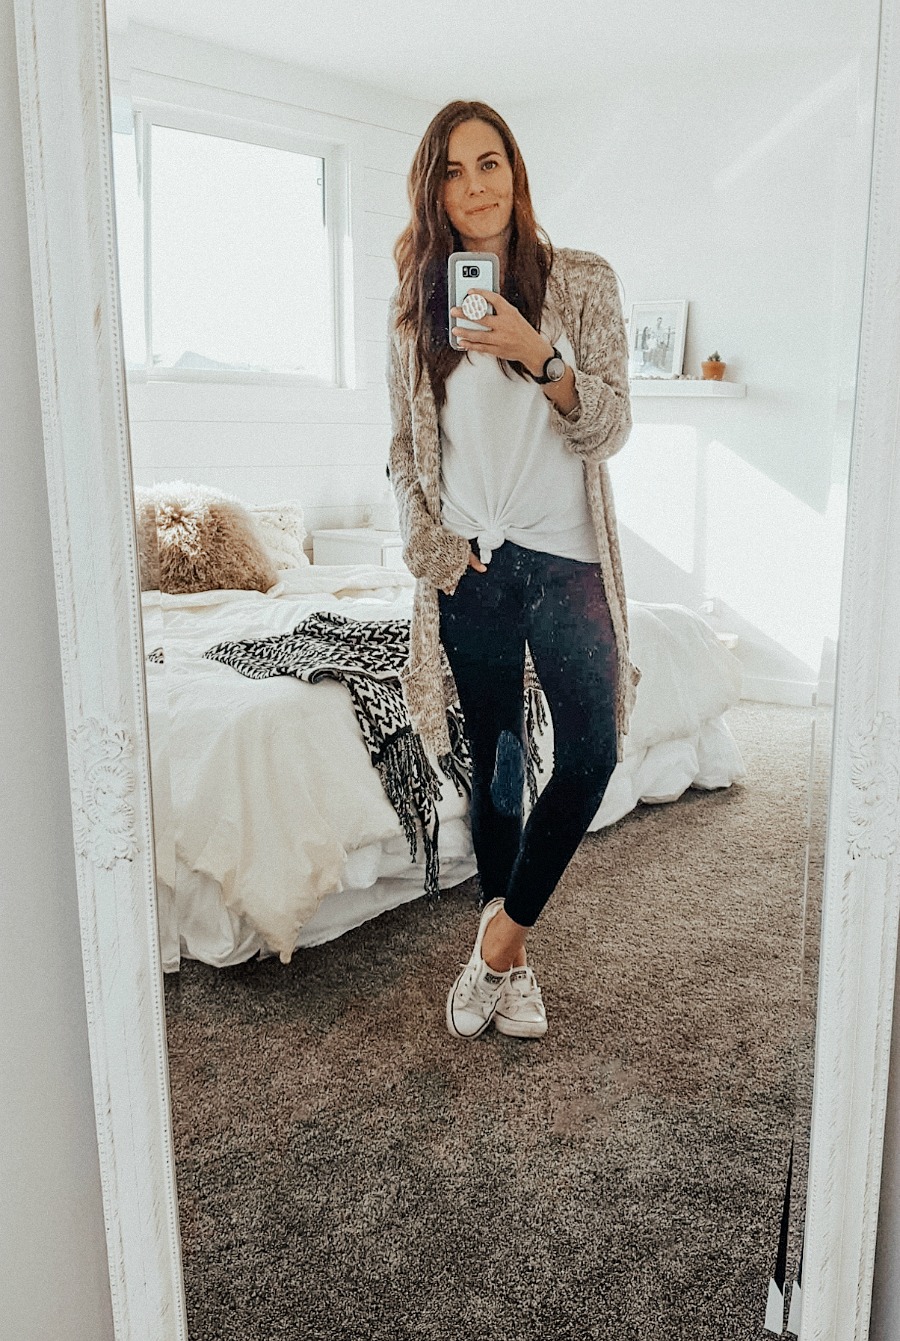 https://theblushhome.com/wp-content/uploads/2018/10/Gorgeous-Womens-Watches-Cozy-Fall-Outfit-Inspo-3.jpg